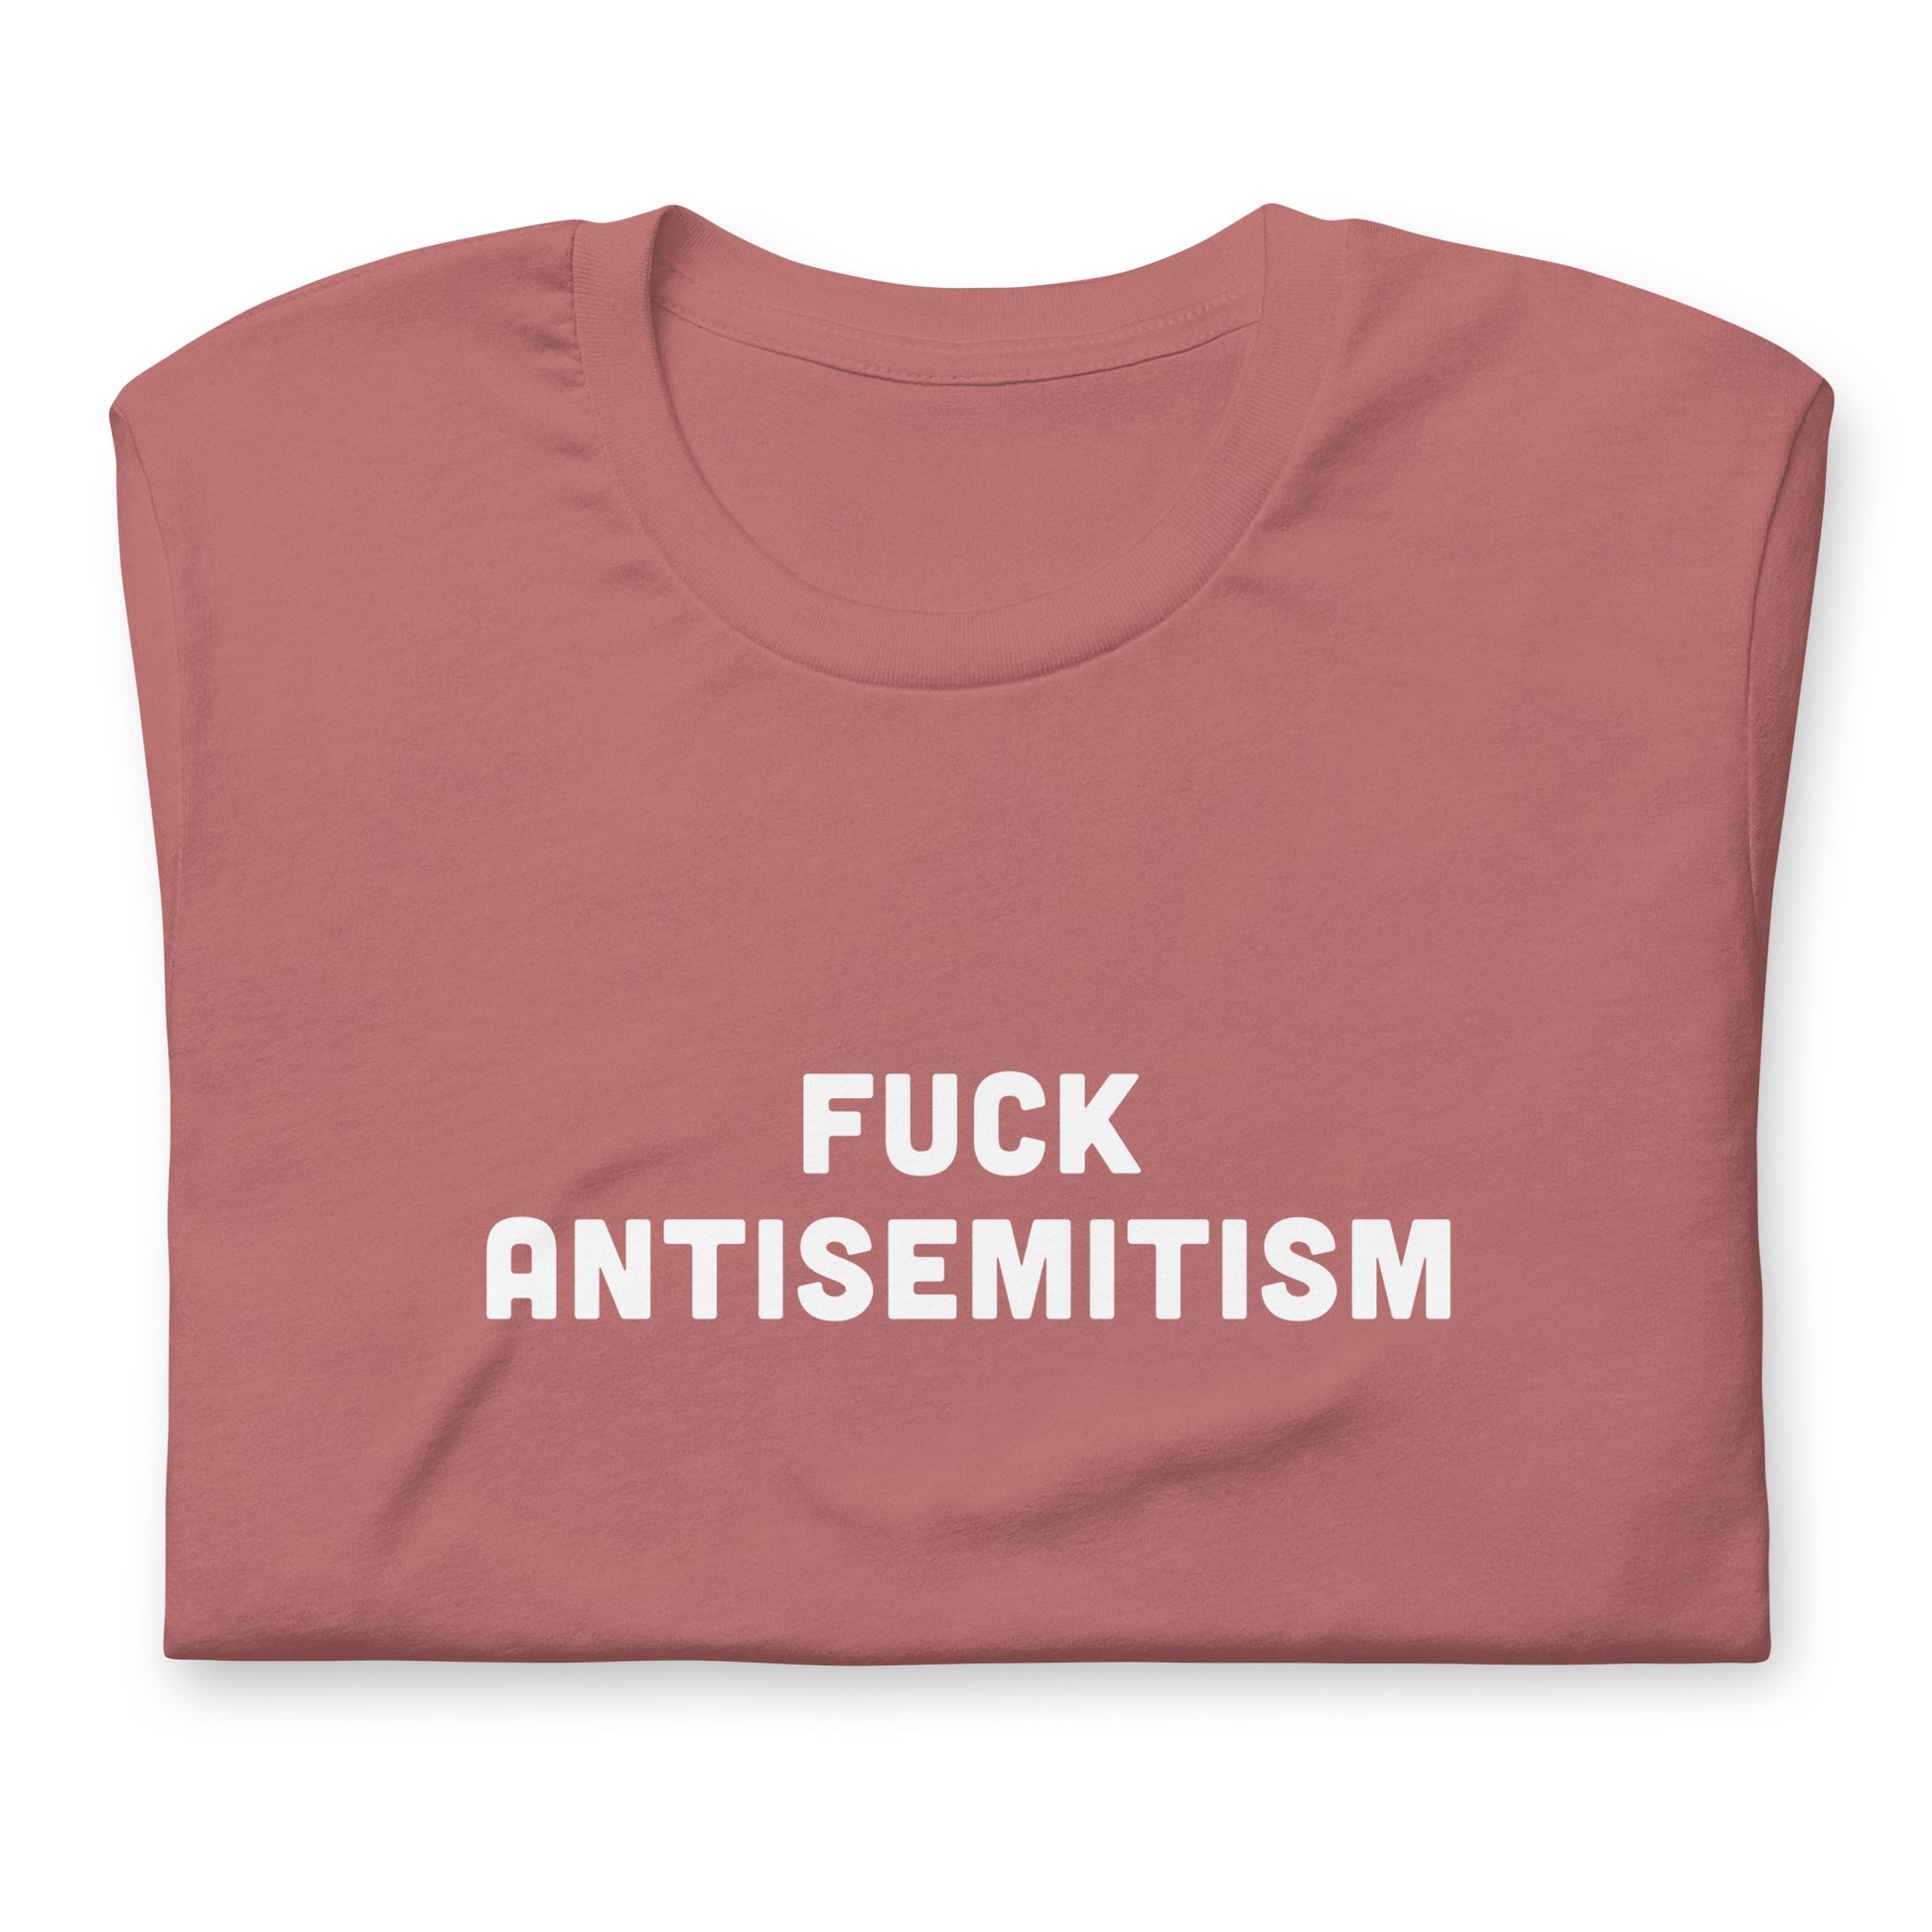 Fuck Antisemitism T-Shirt Size 2XL Color Navy